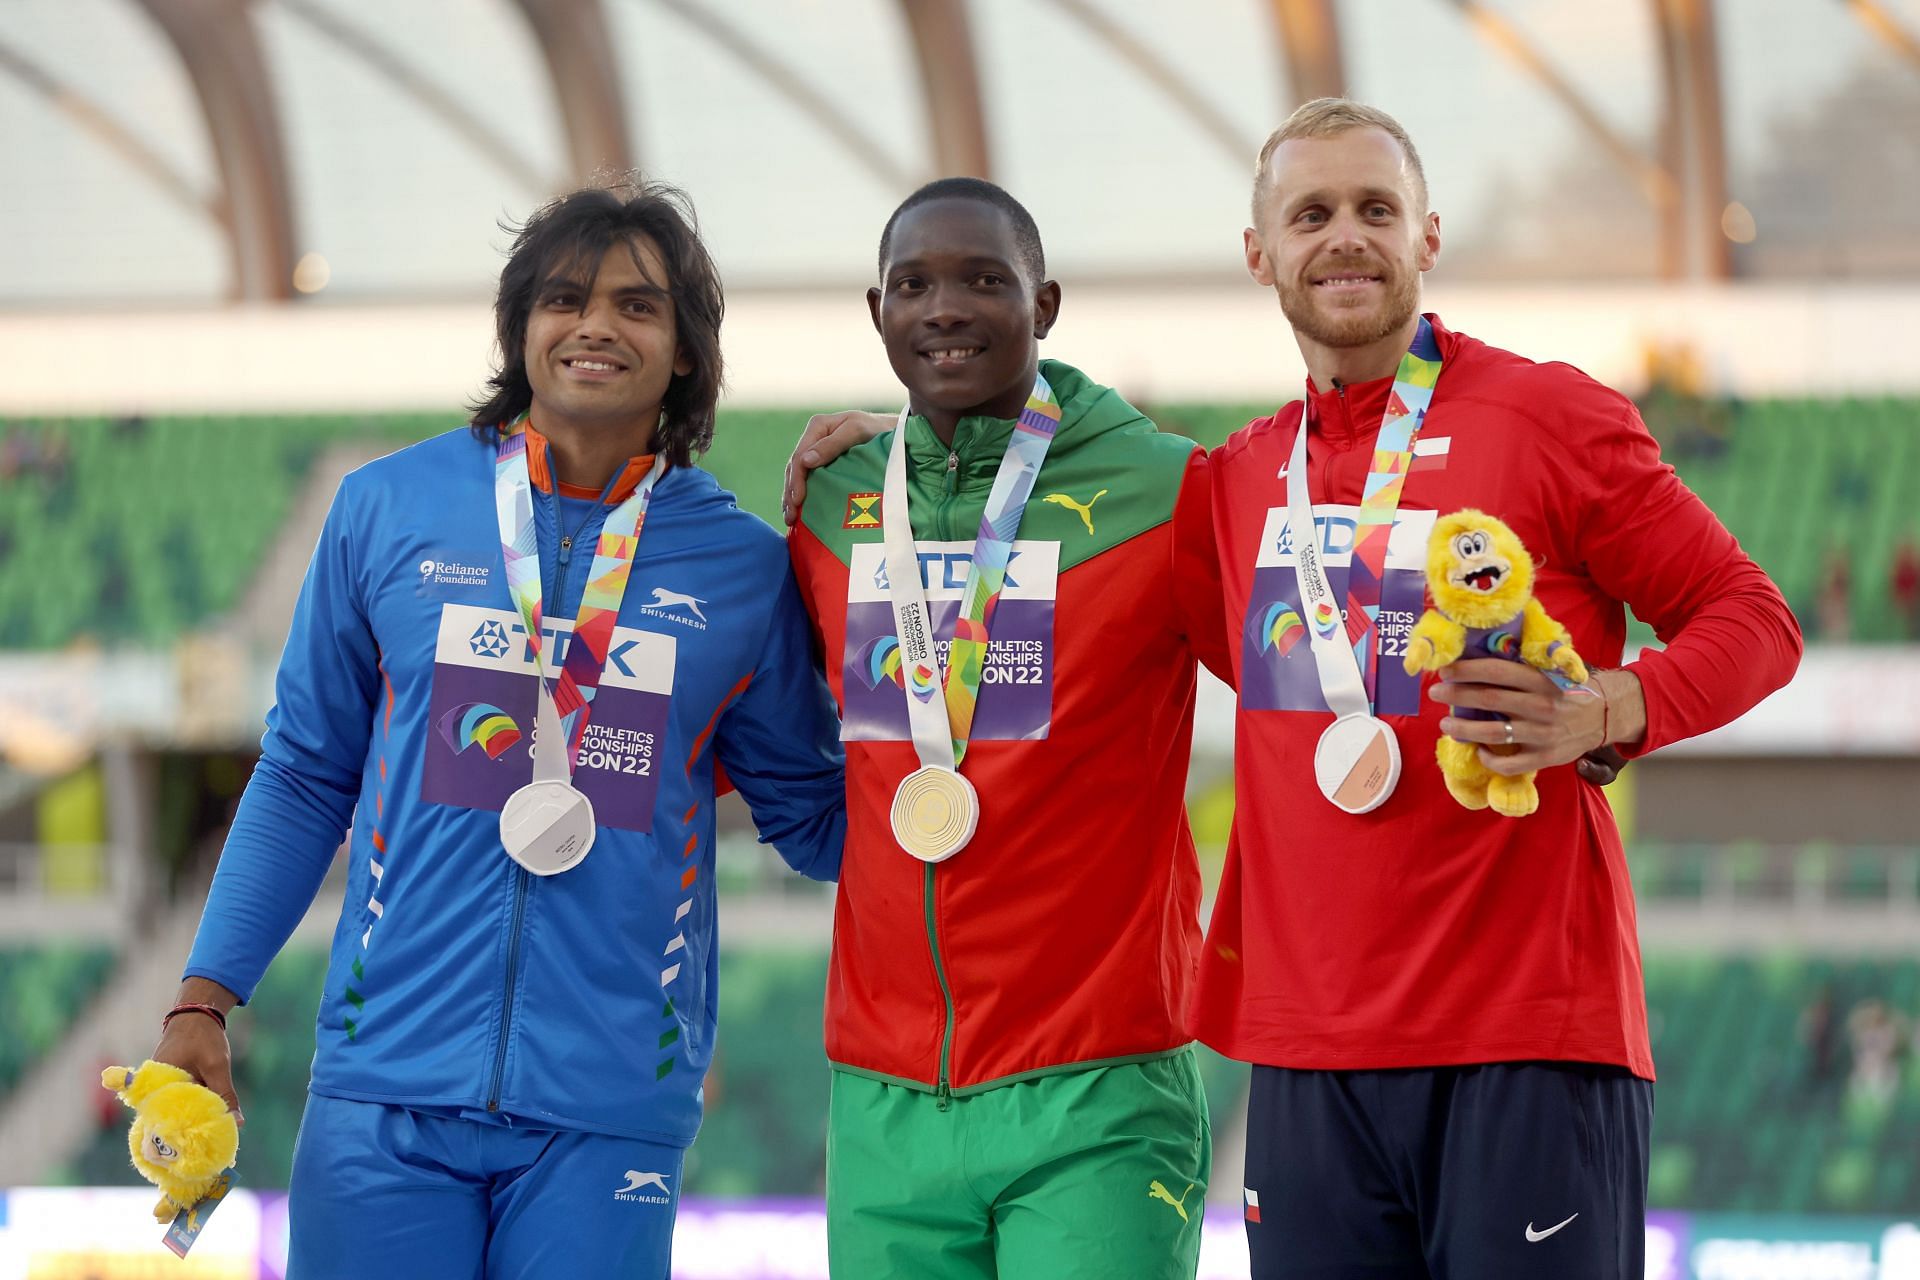 (From left to right) Neeraj Chopra, Anderson Peters and Jakub Vadlejch on the podium. (PC: Getty Images)